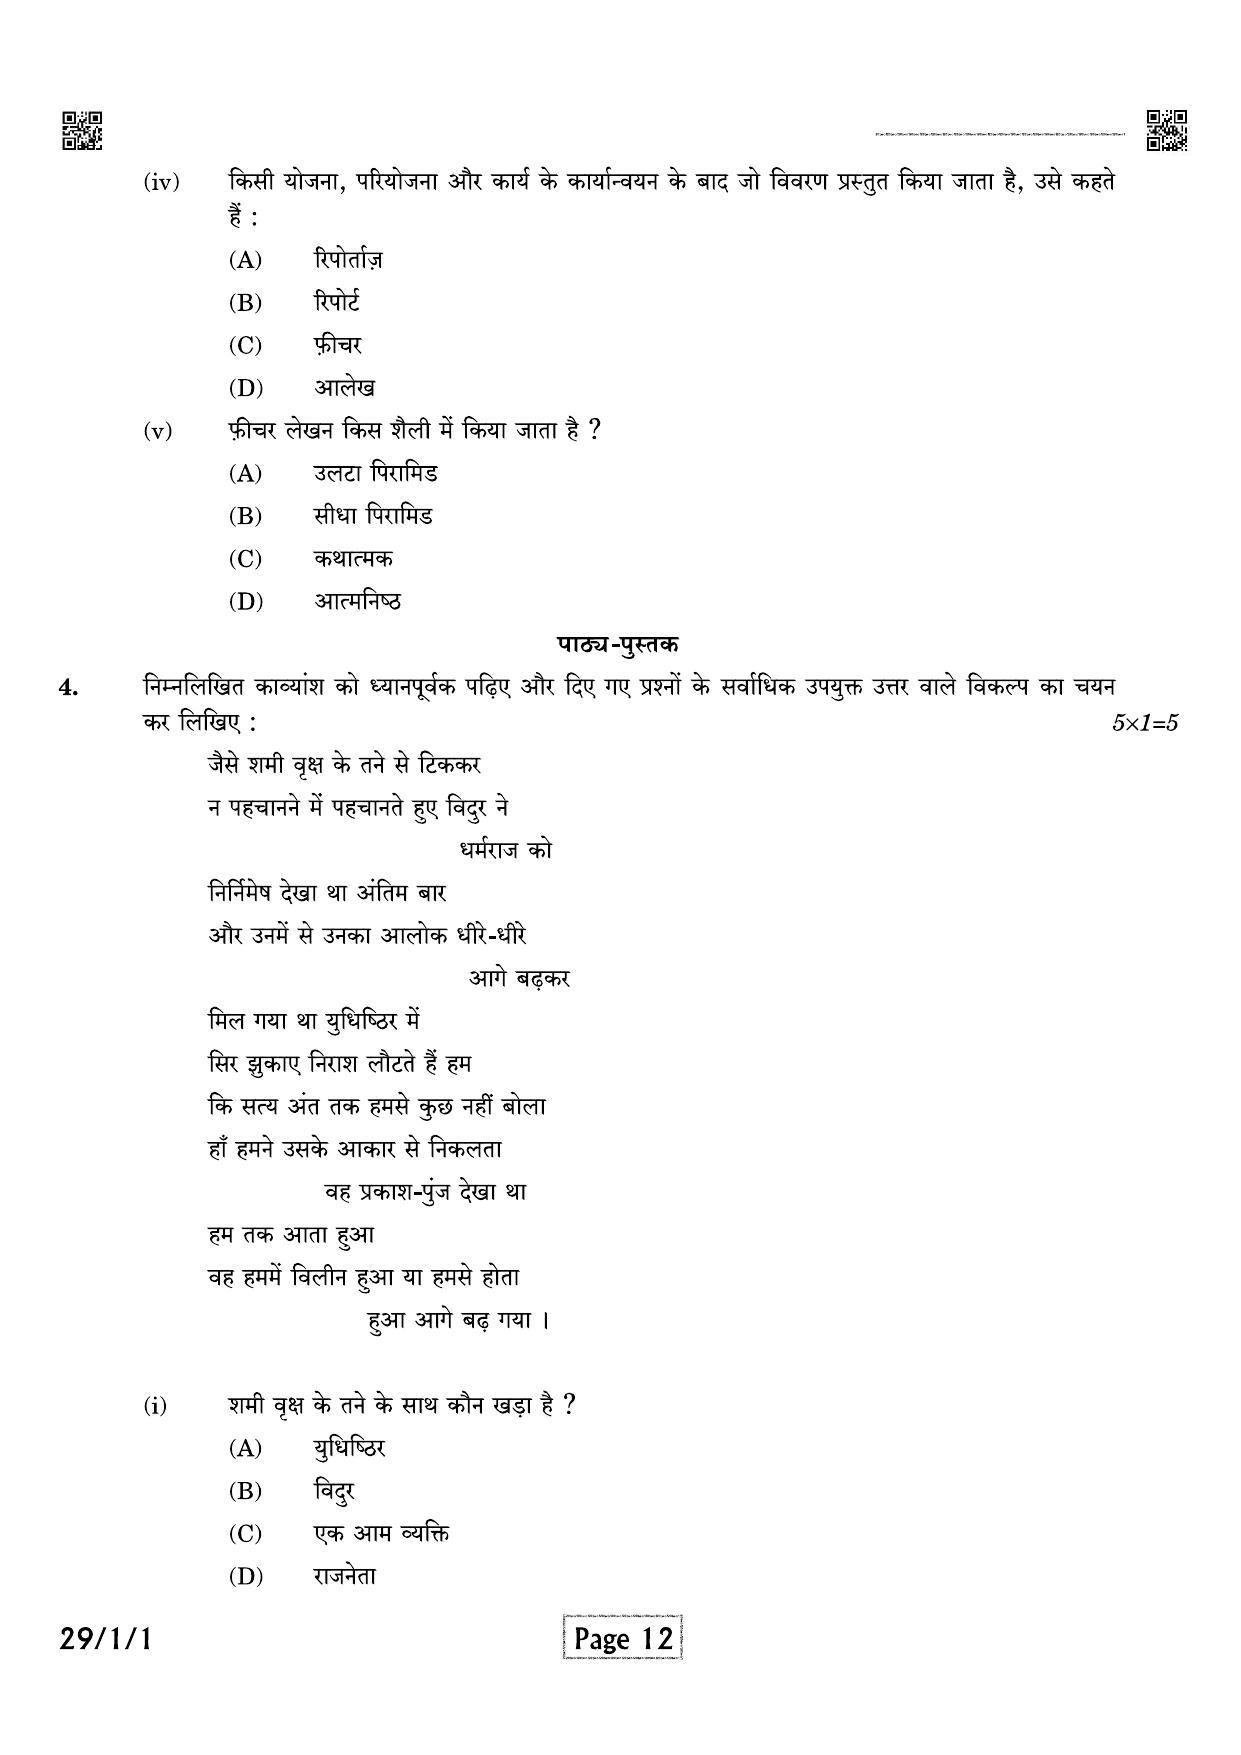 CBSE Class 12 QP_002_HINDI_ELECTIVE 2021 Compartment Question Paper - Page 12